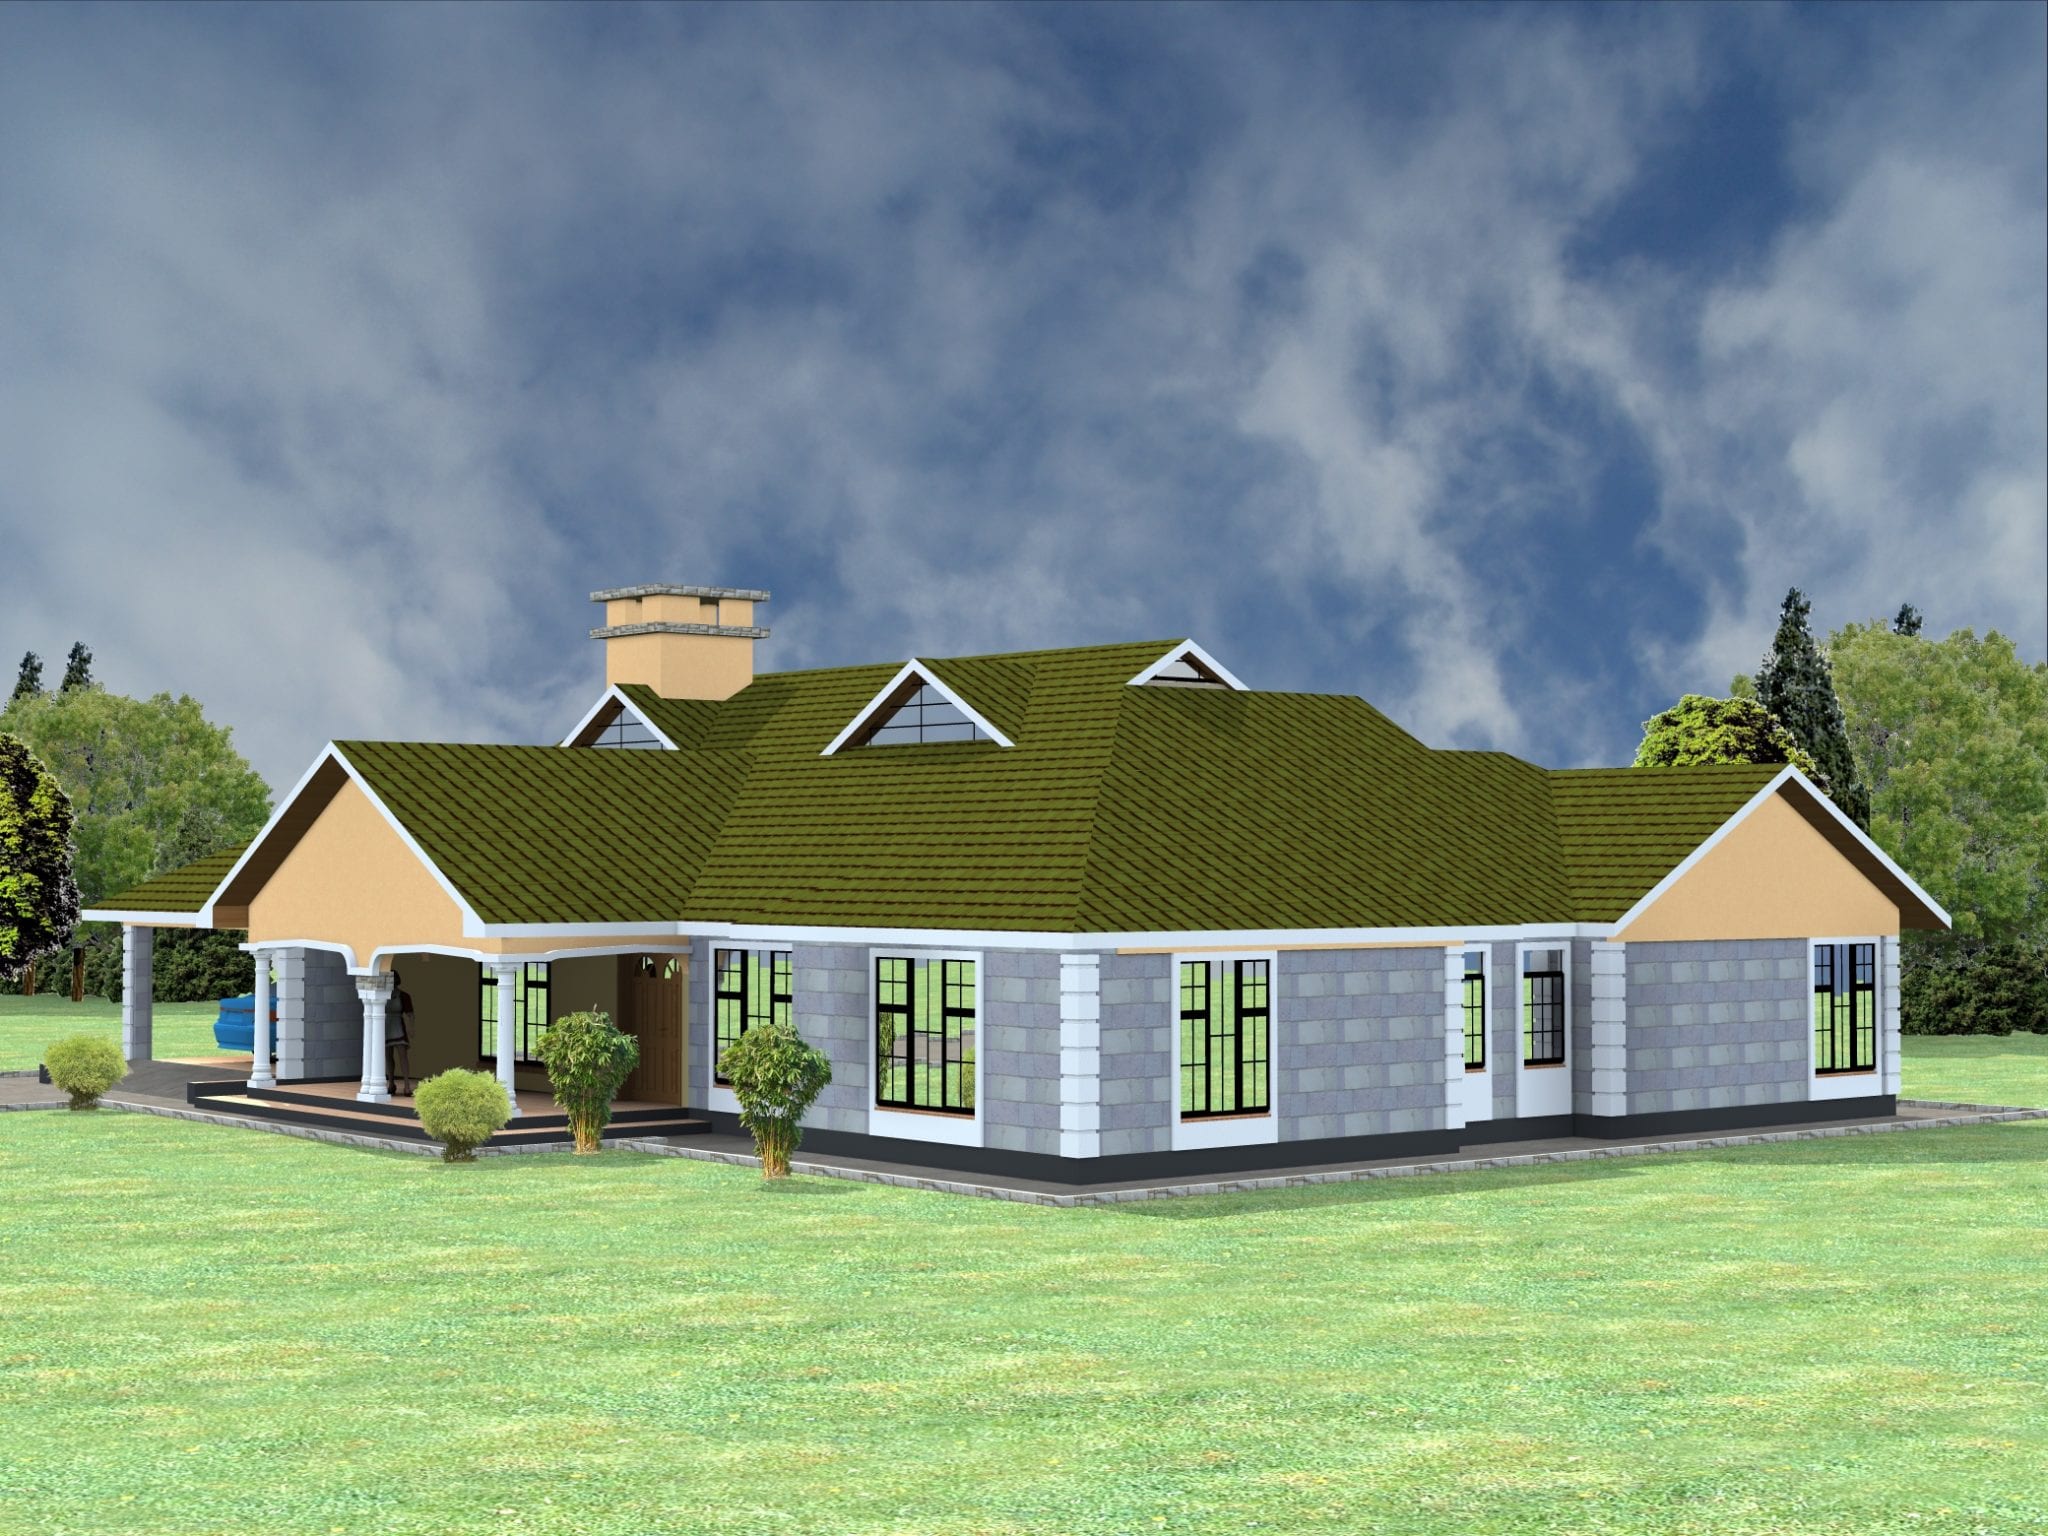 4 bedroom house plans and designs in kenya |HPD Consult